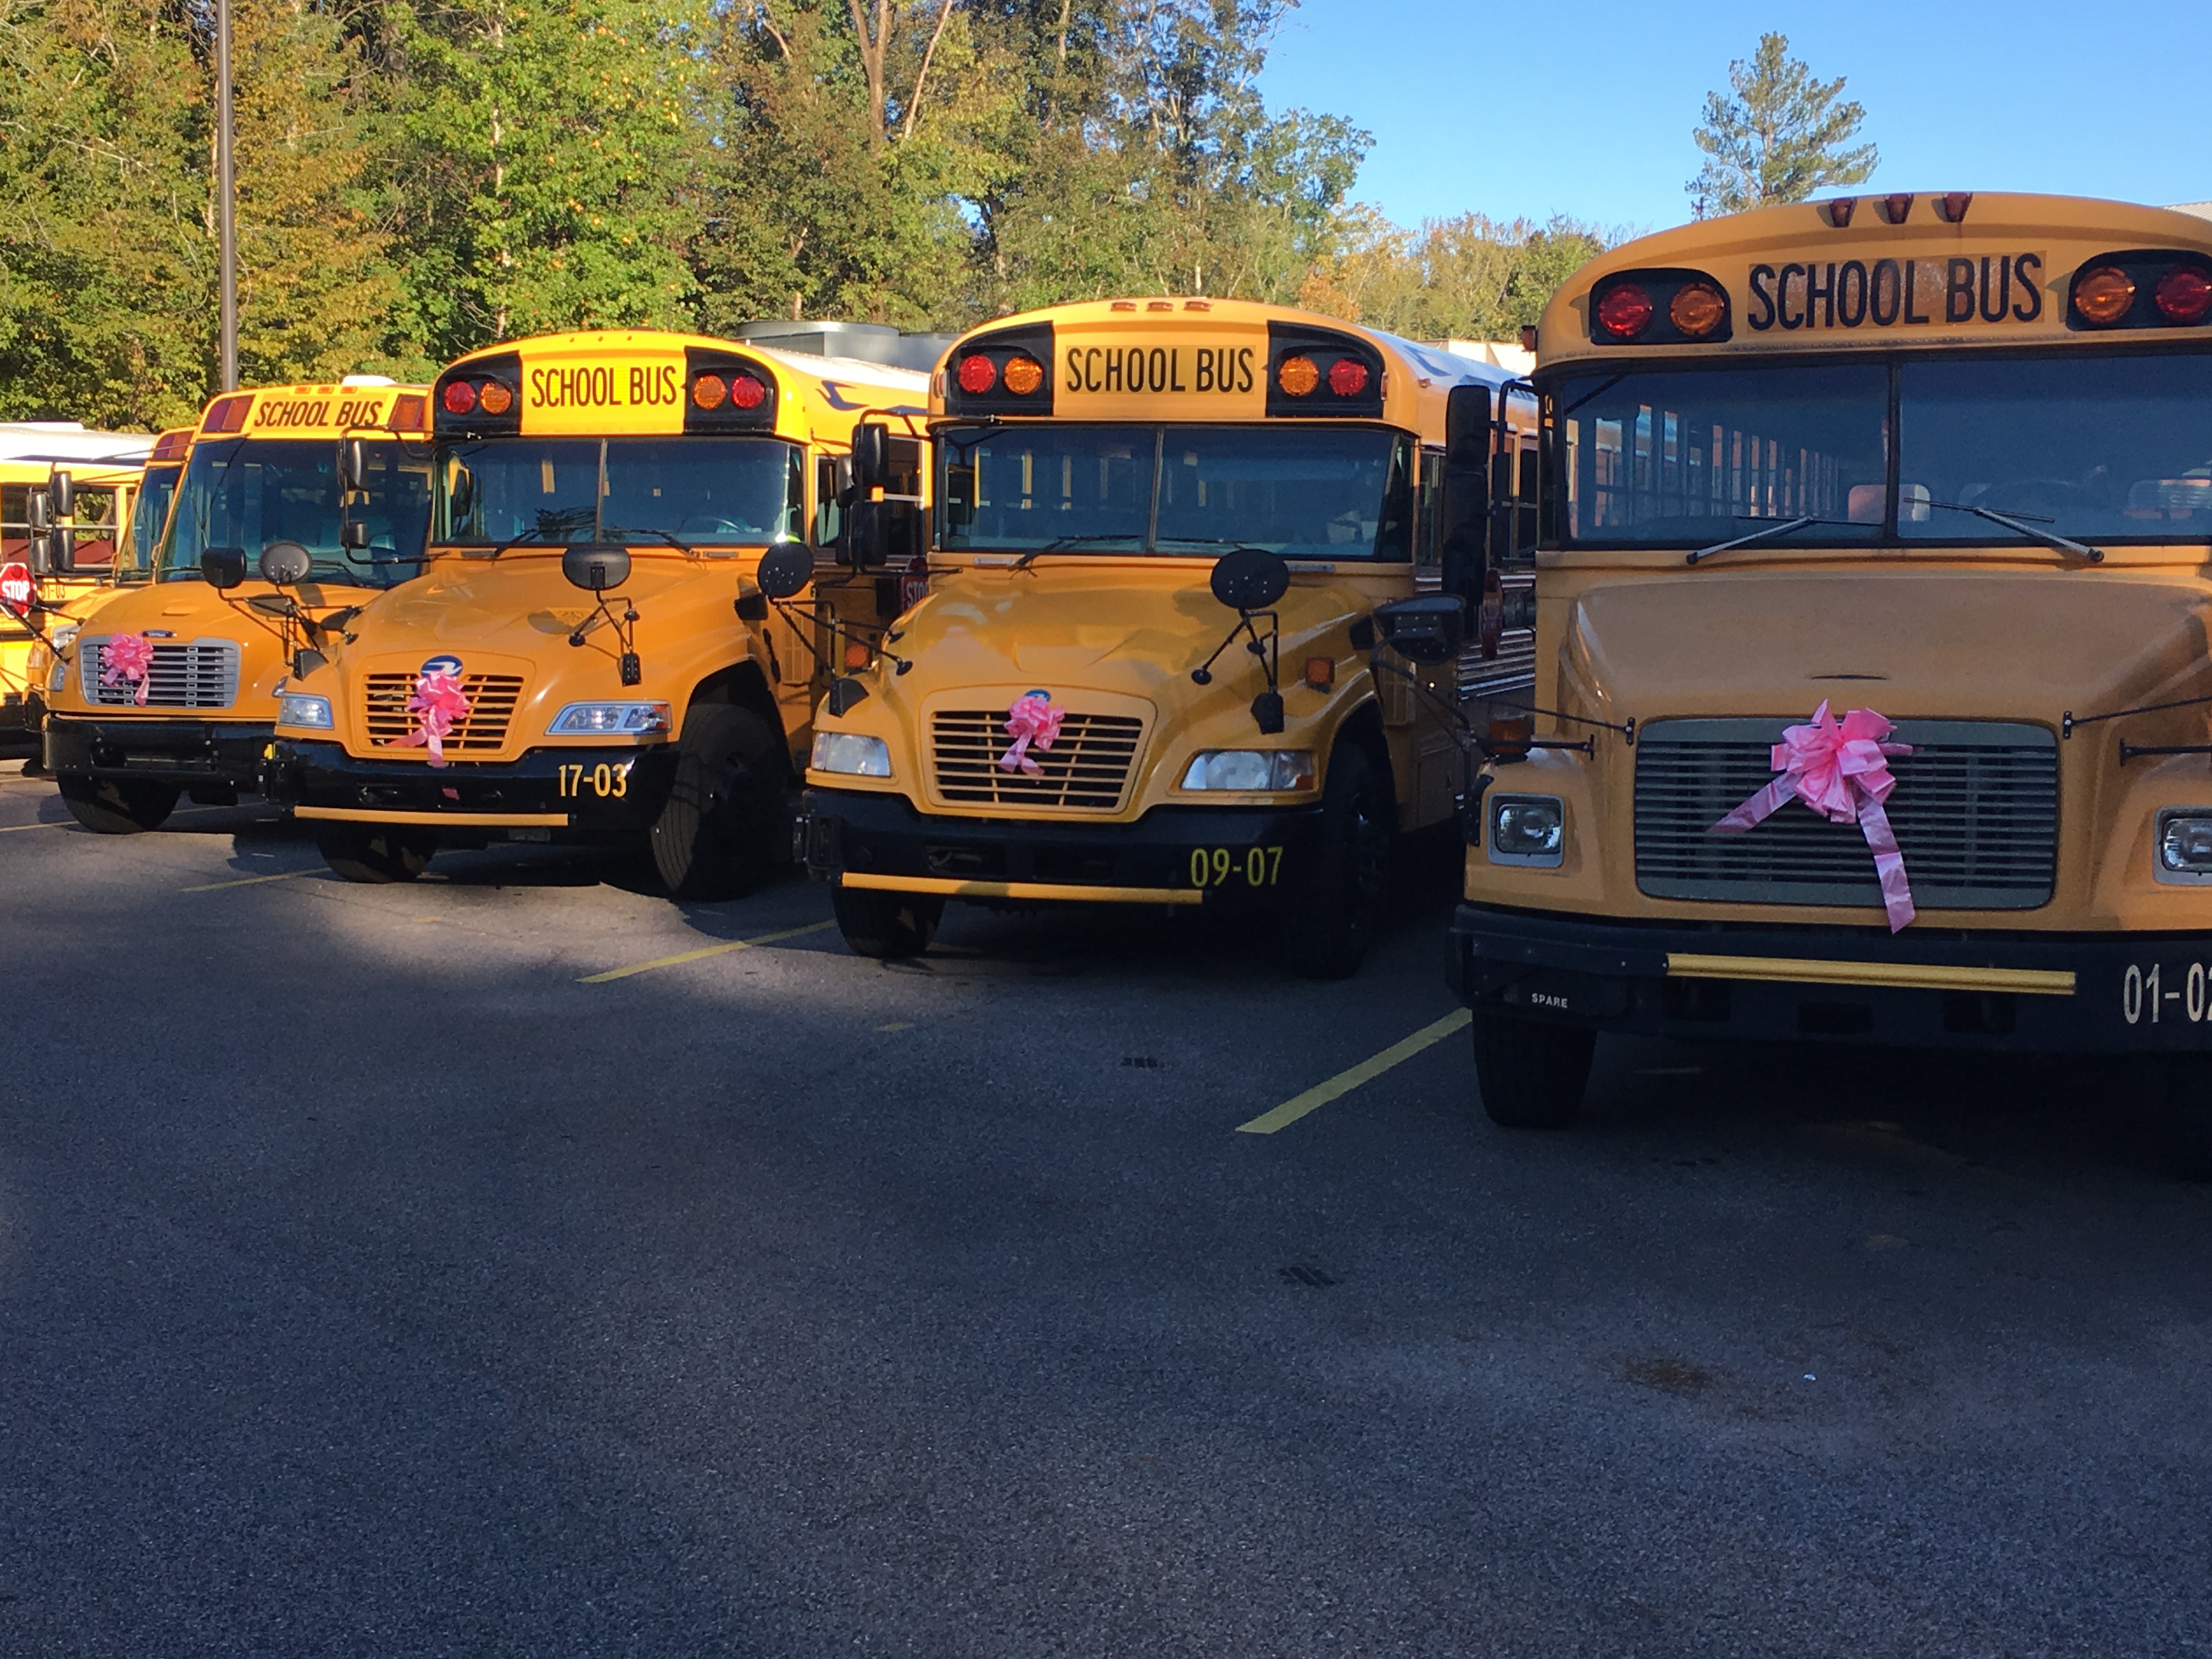 National week-long campaign narrows focus on school bus safety in Trussville